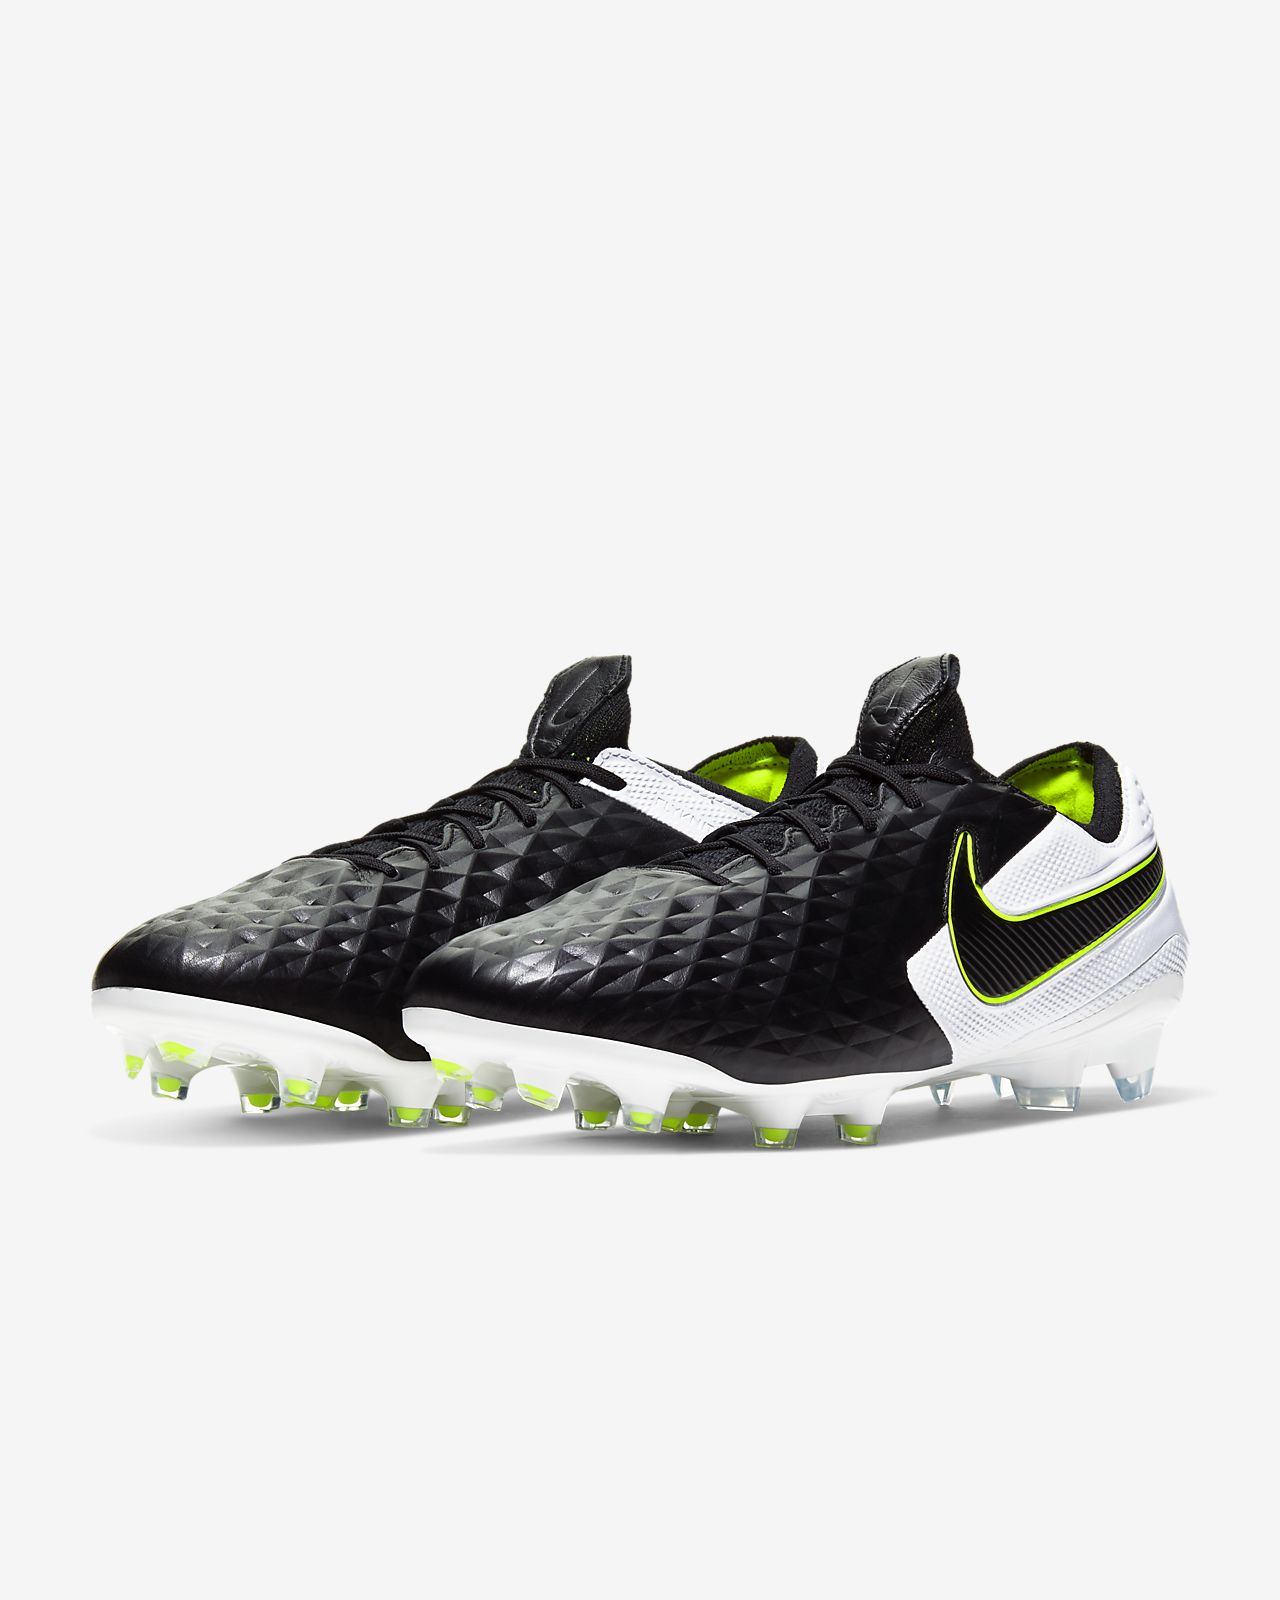 Nike Tiempo Legend 8 Academy FG MG Shoes for sale in.